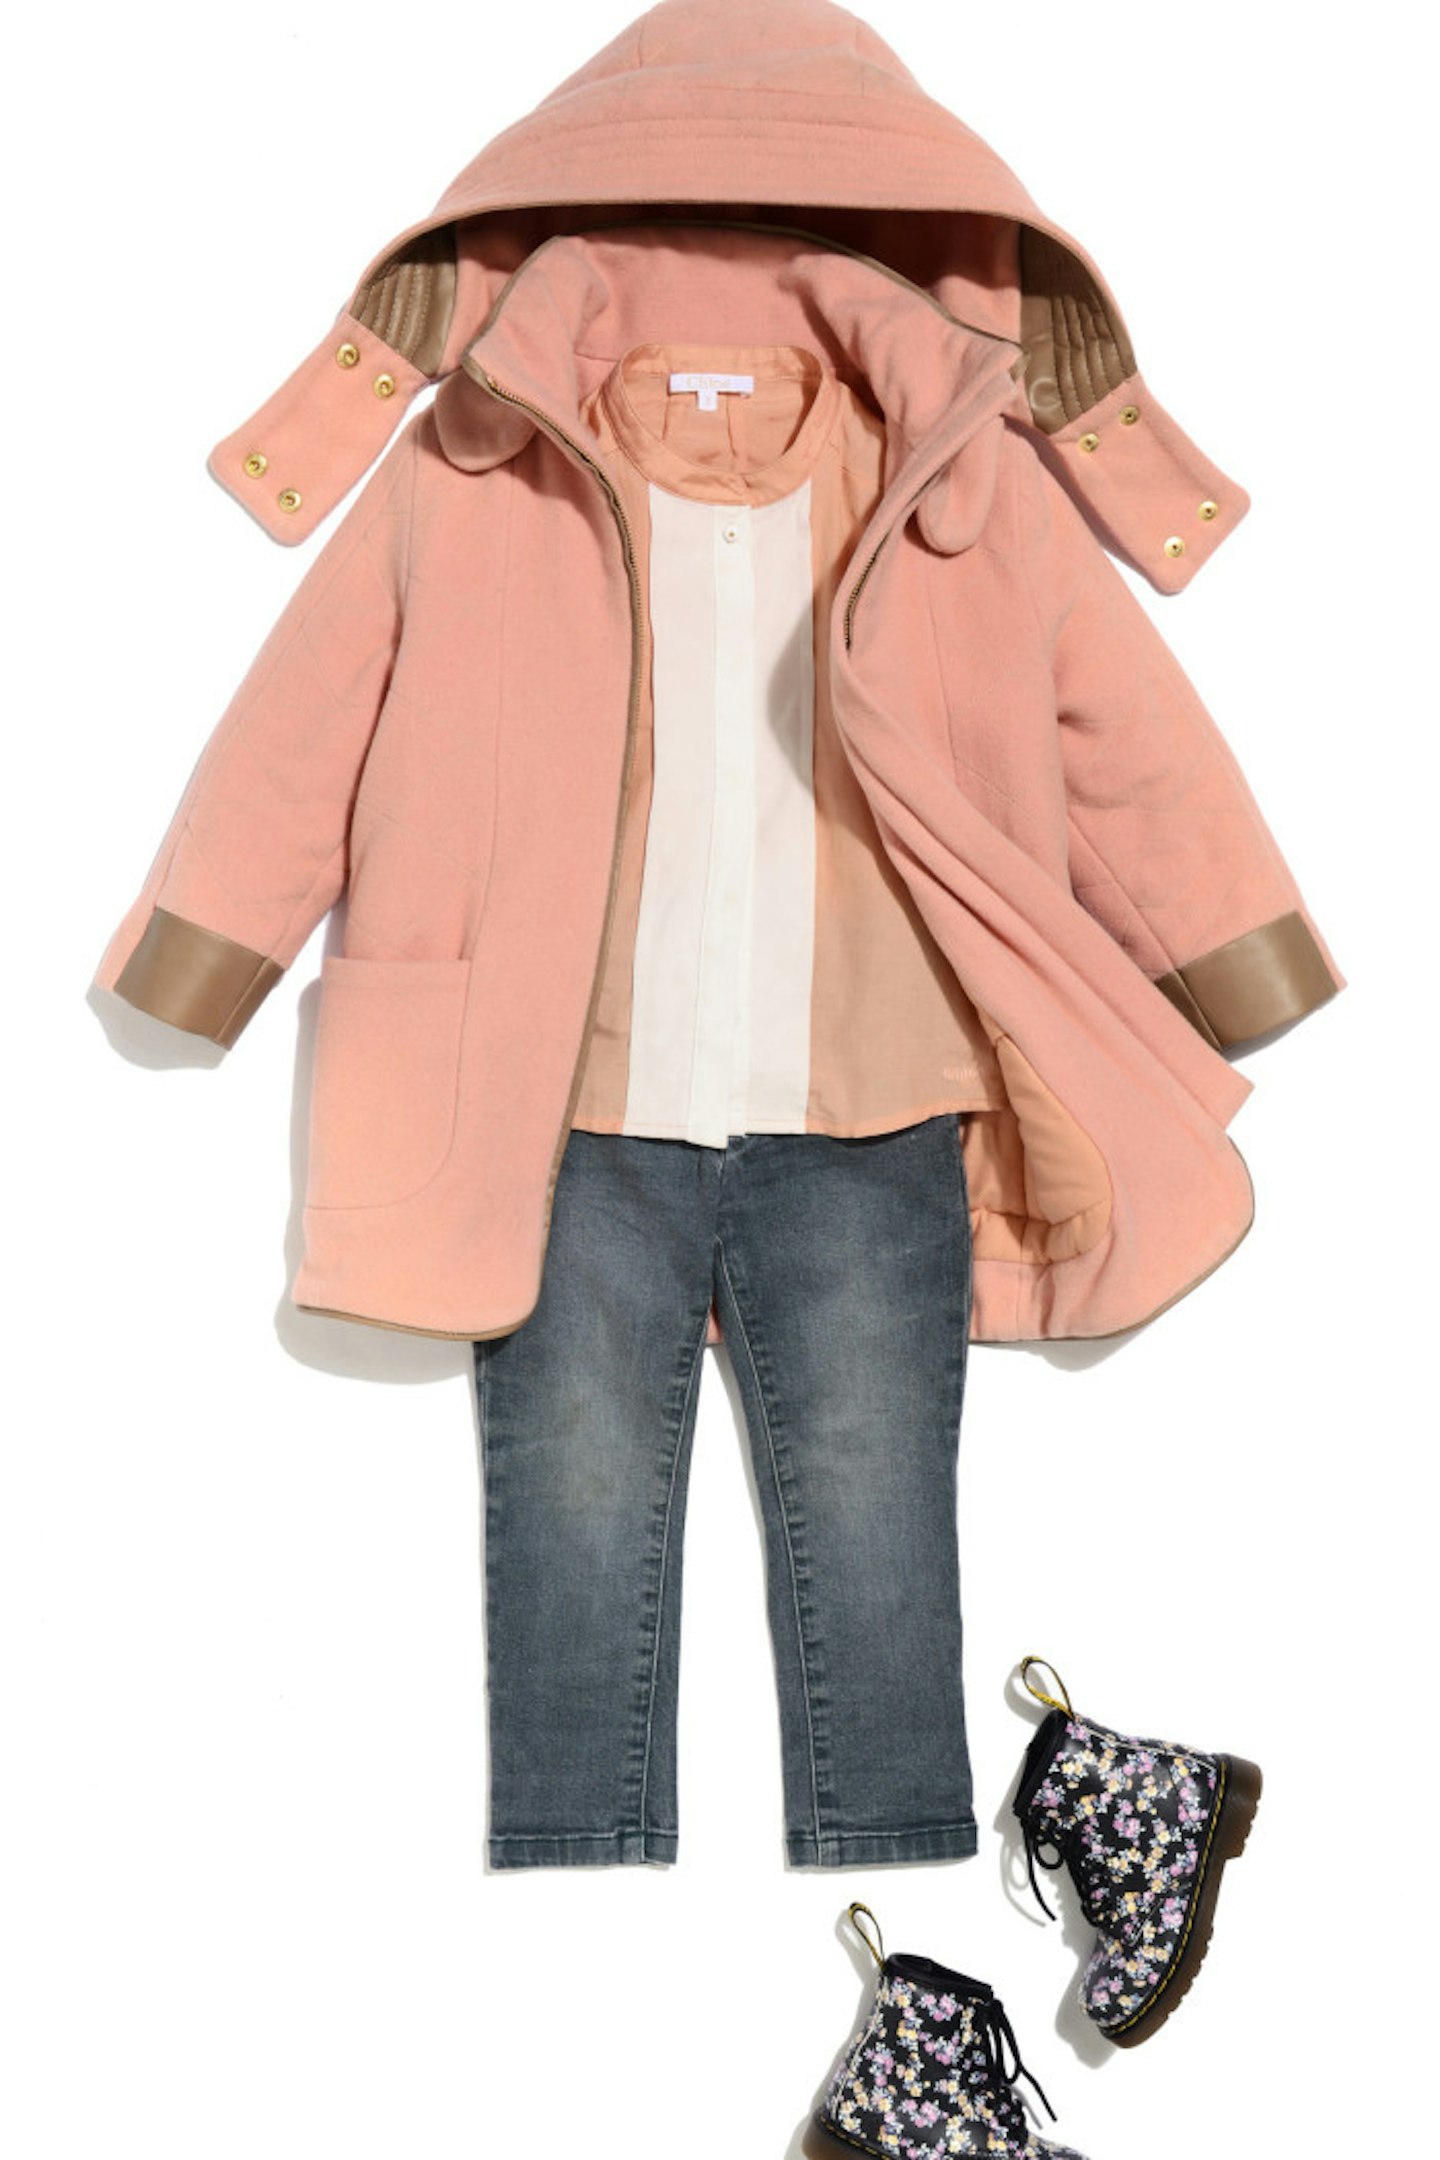 Bonpoint jeans with a Chloe peach/white collarless shirt, Chloe peach coat and Flower Doc Martens